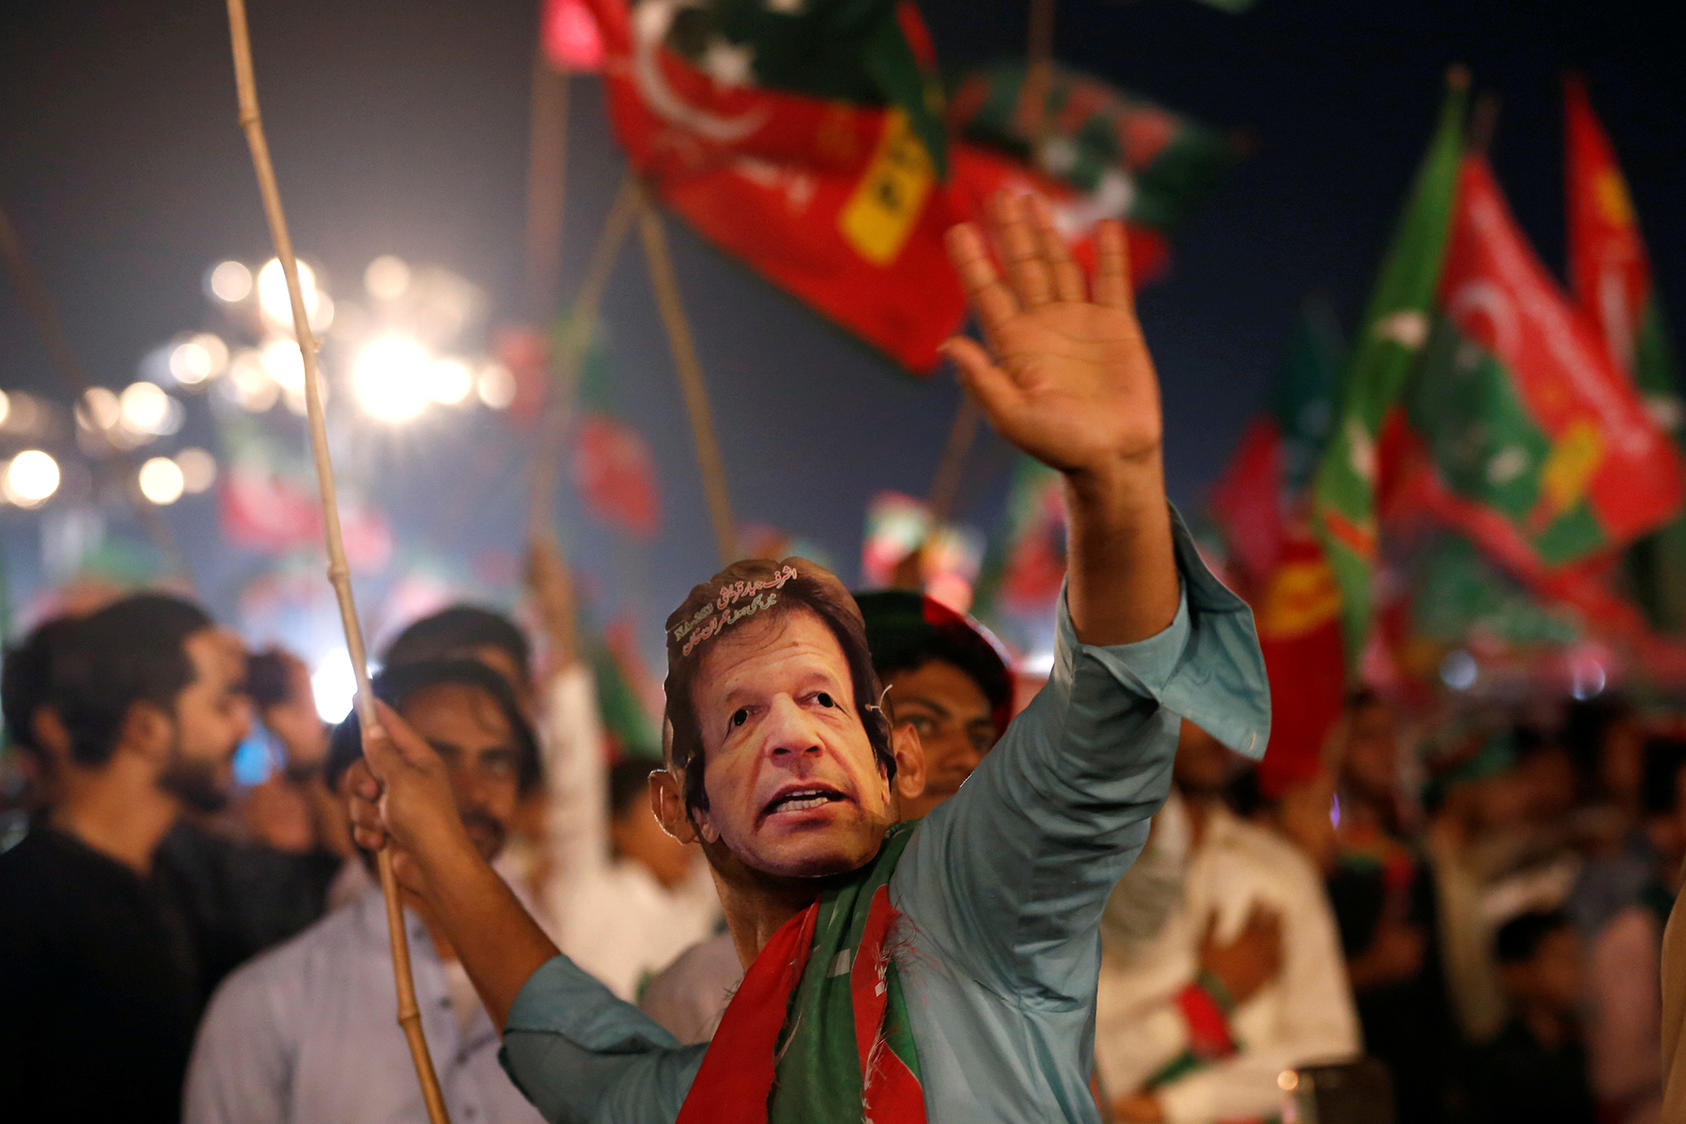 A supporter of Imran Khan, whose Tehreek-e-Insaaf party ultimately won a plurality of legislative seats, wears a mask with Khan’s face during a campaign rally. (Photo by Akhtar Soomro/Reuters)